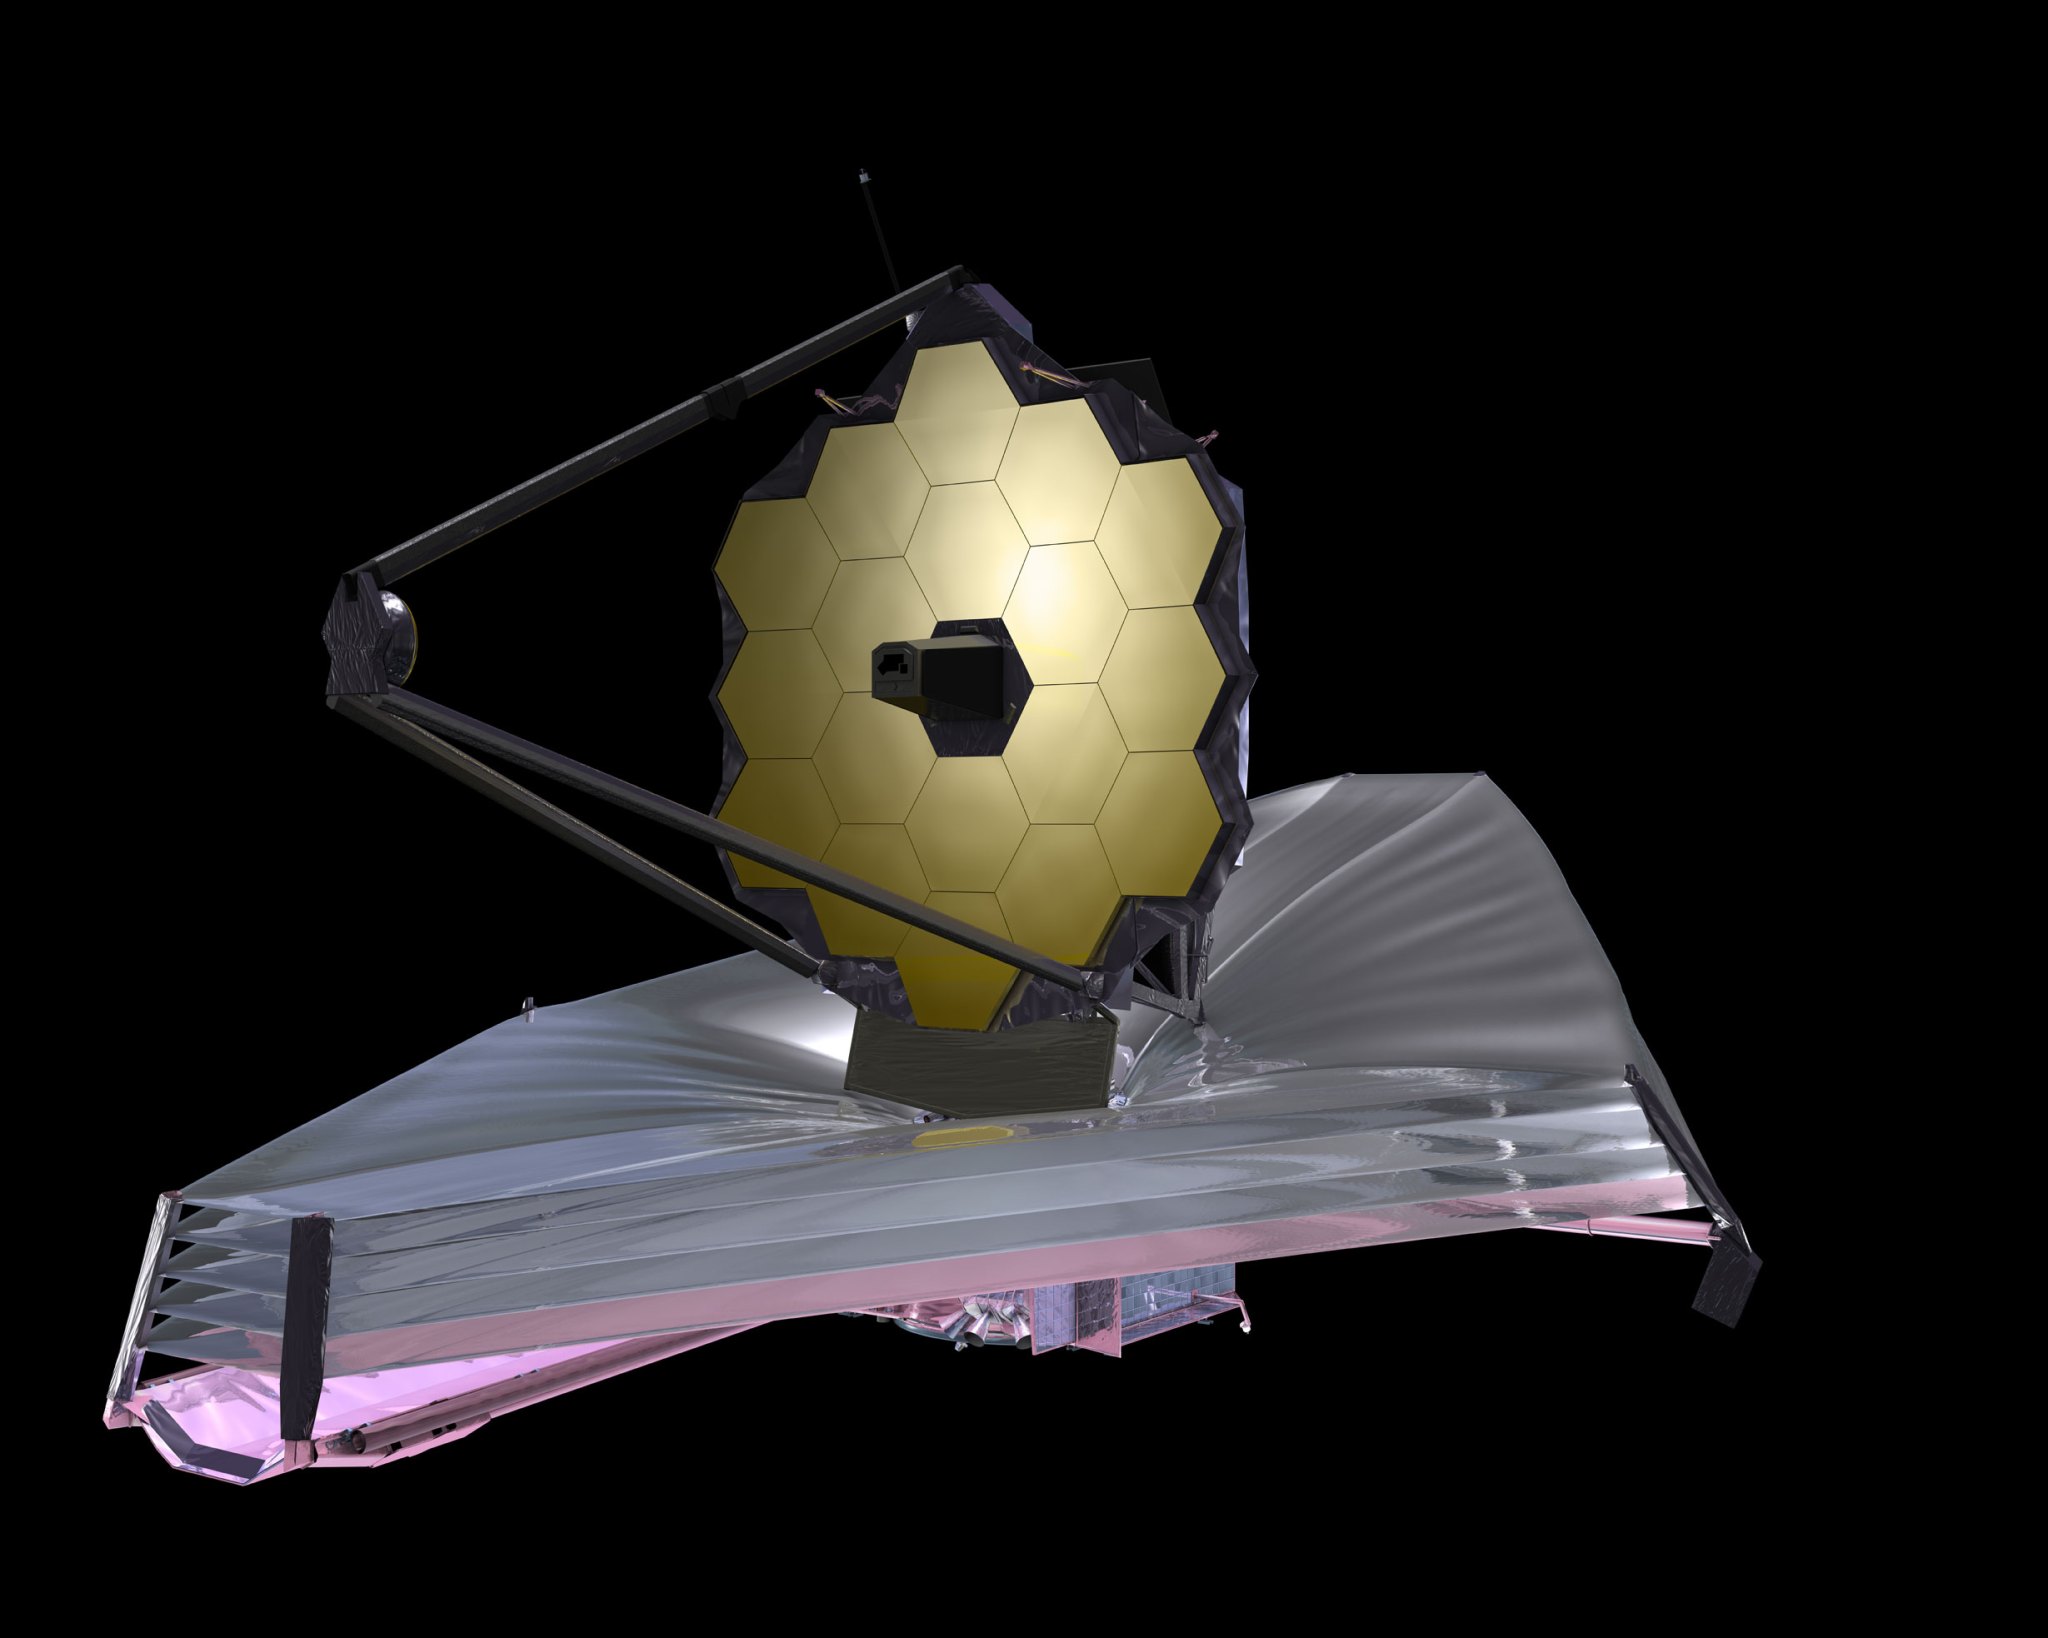 Artist concept of the he James Webb Space Telescope